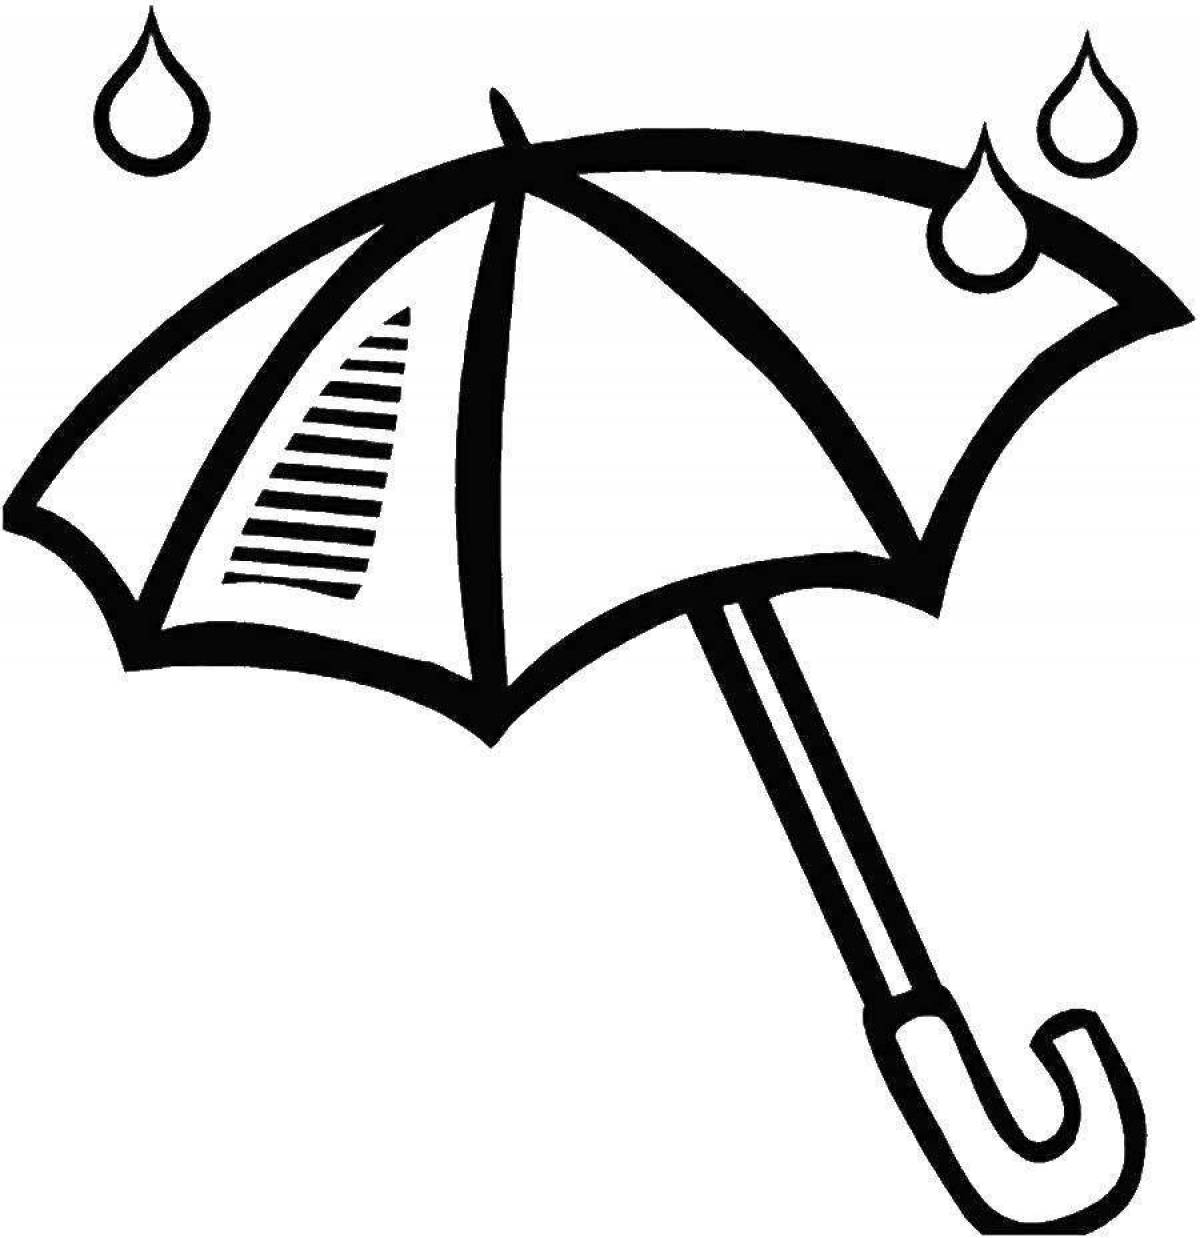 Colorful and adorable umbrella coloring book for kids